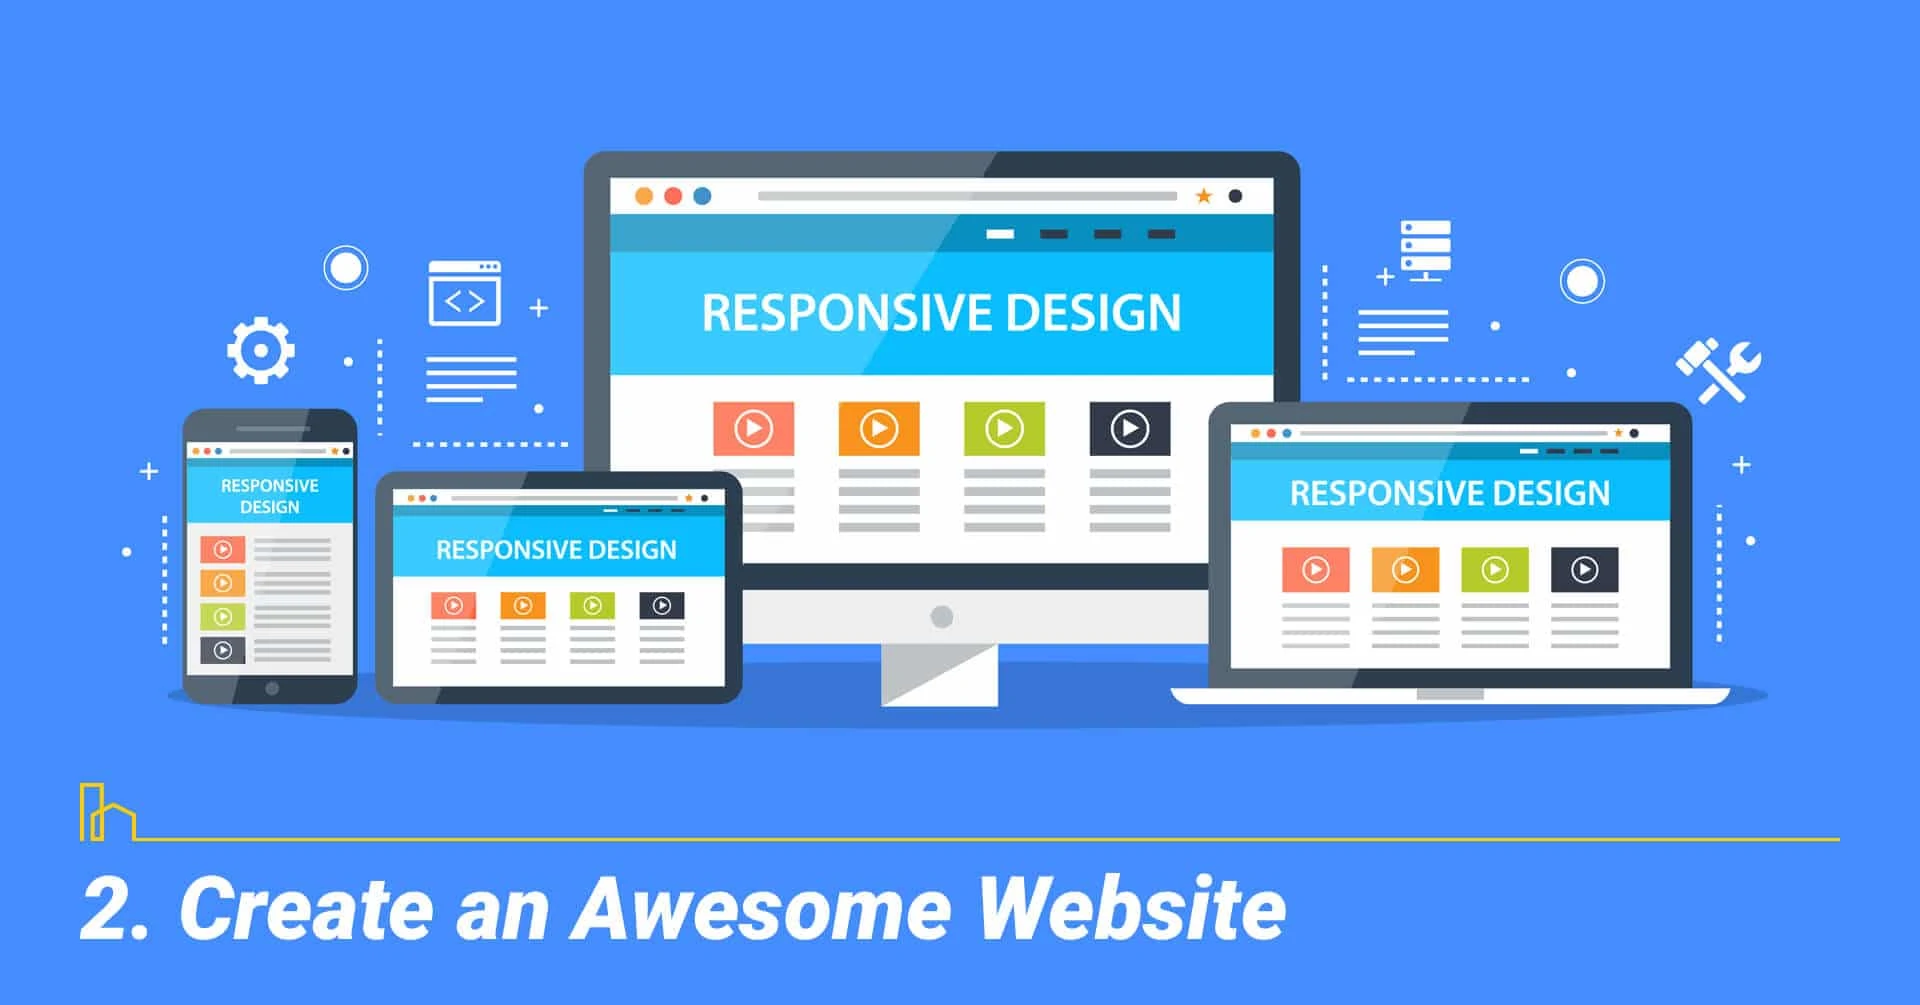 Create an Awesome Website, create a great website for your business